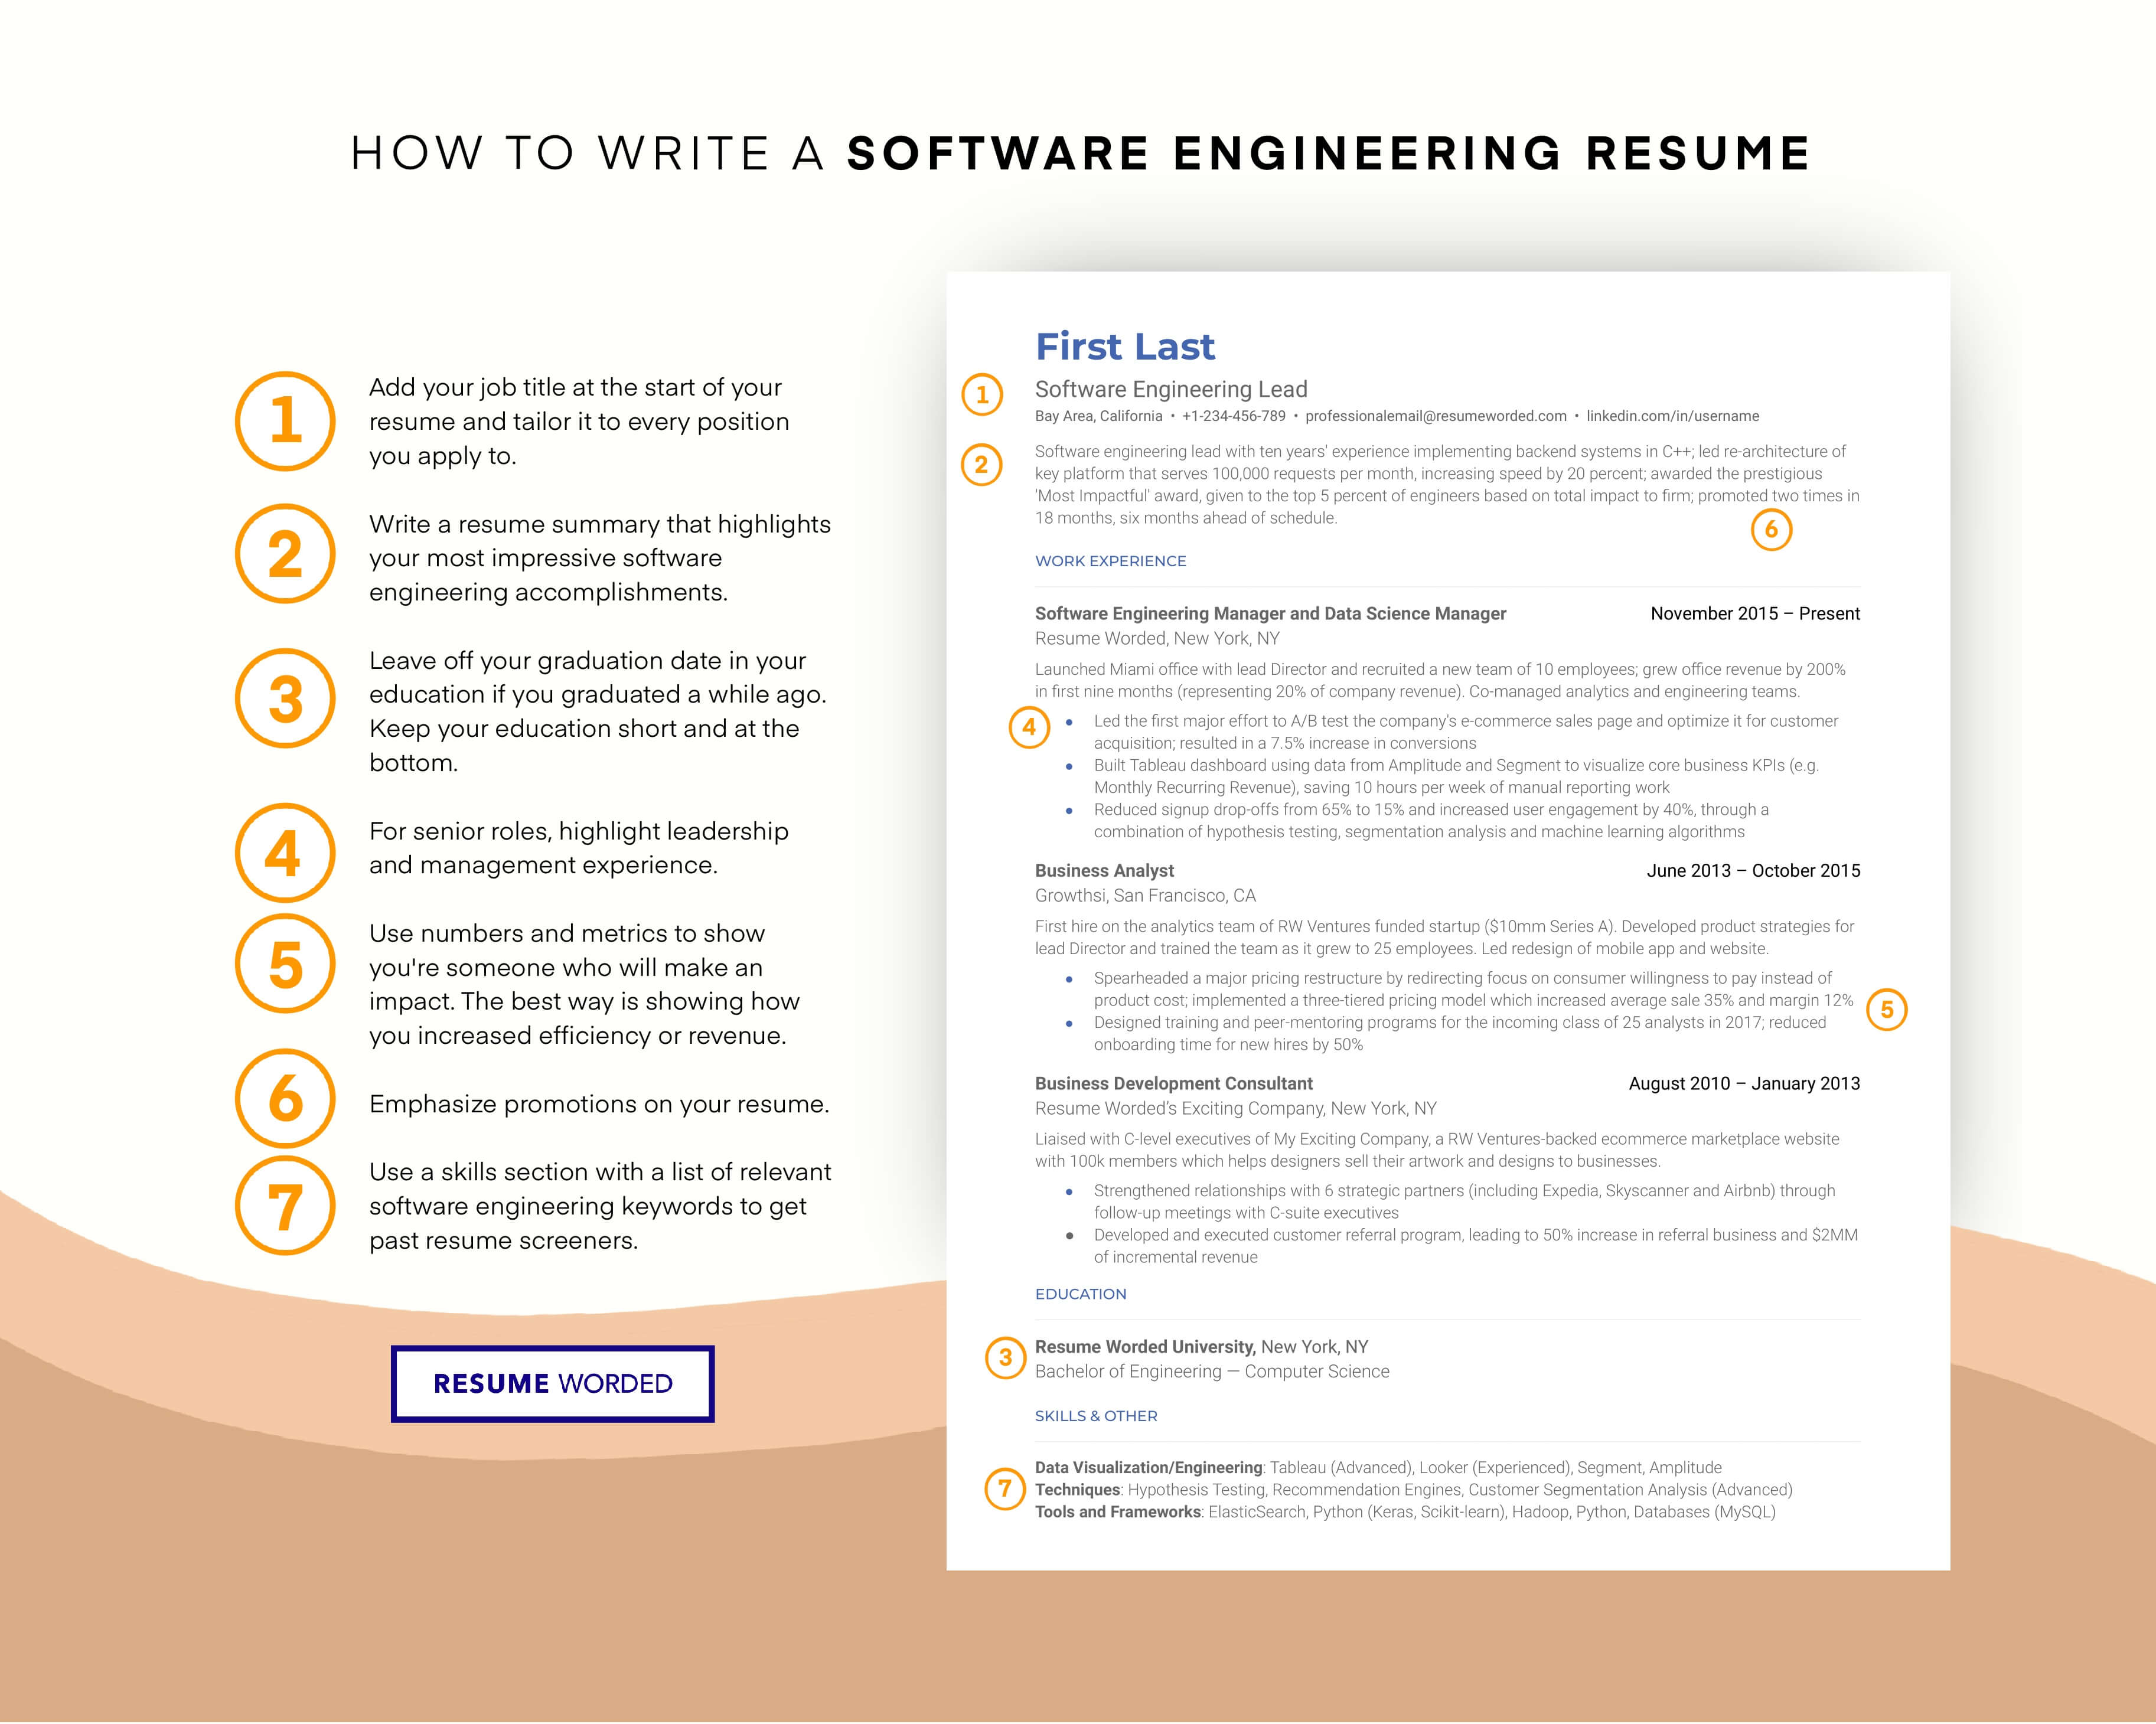 Showcase your software skills - Office Manager Resume